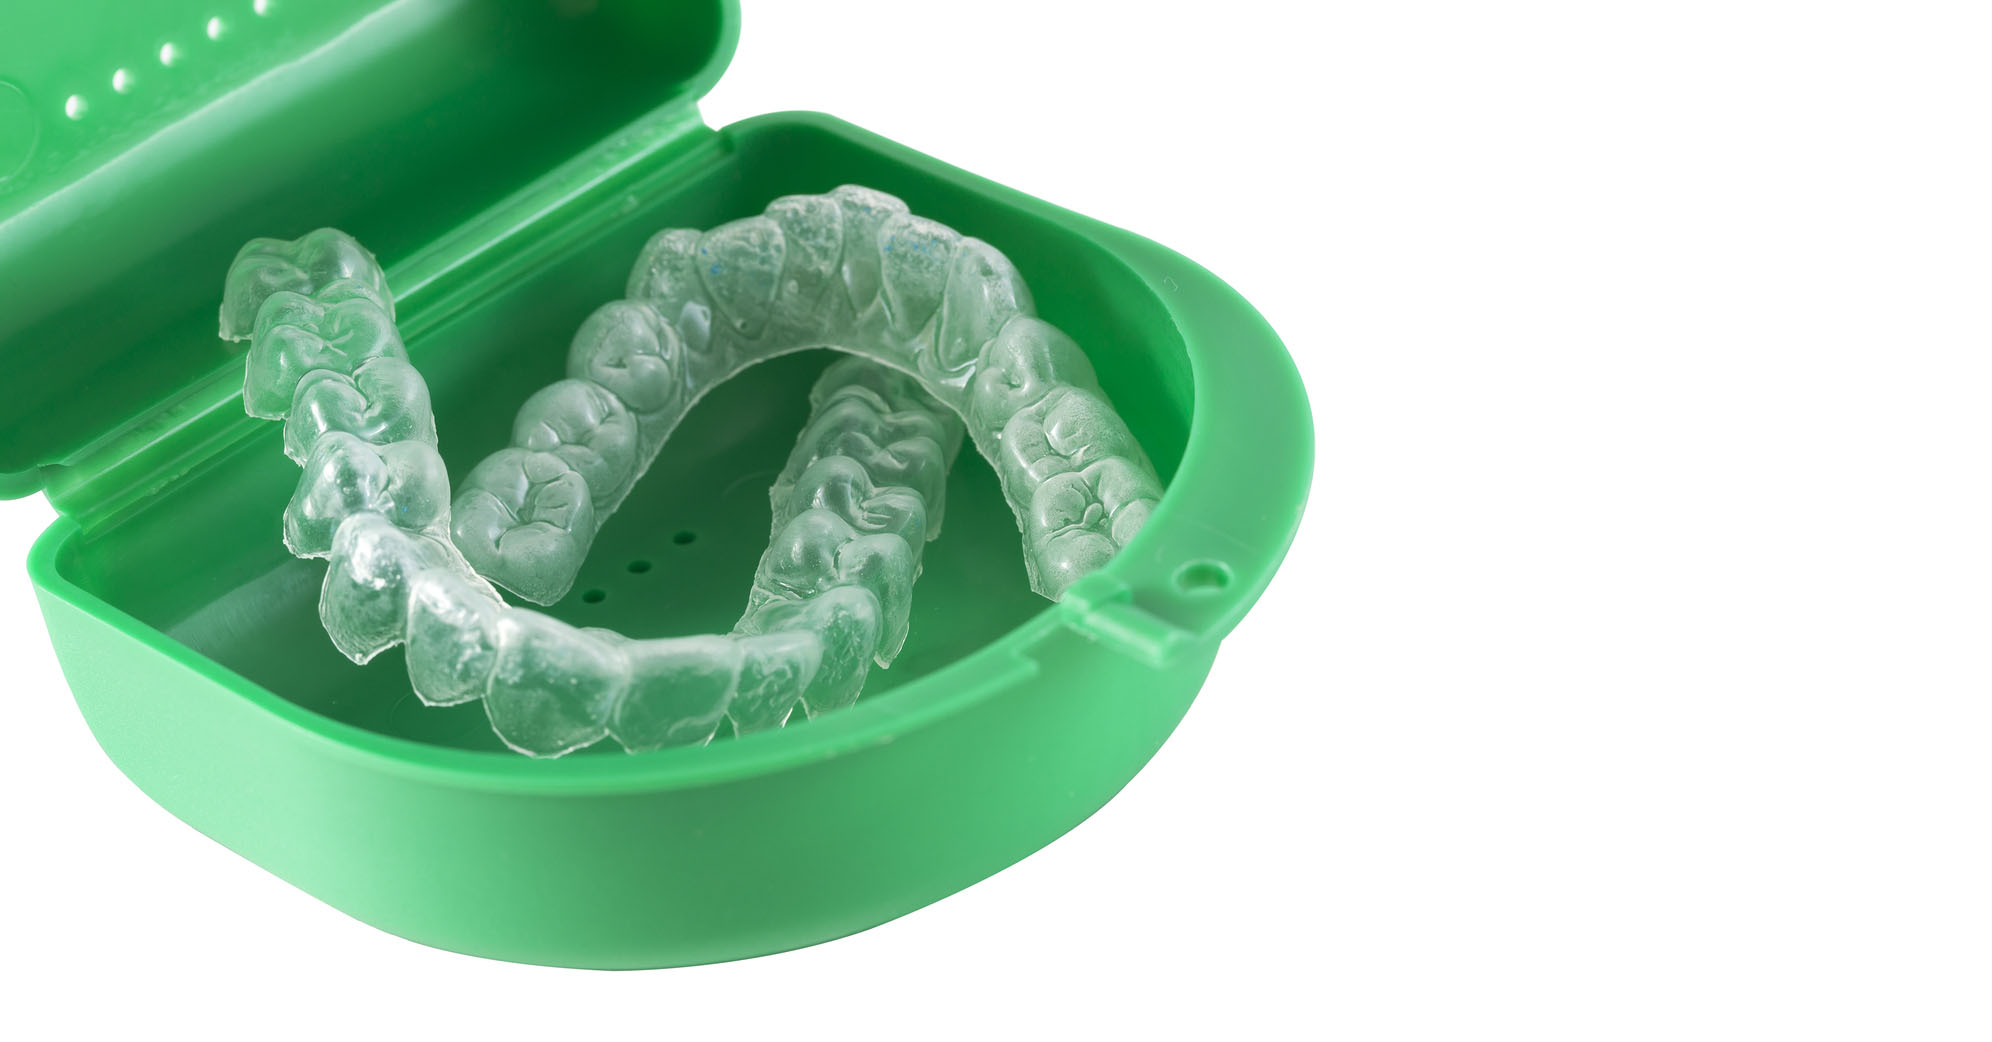 Mouth Guard - Orthodontic Retainers isolated on white